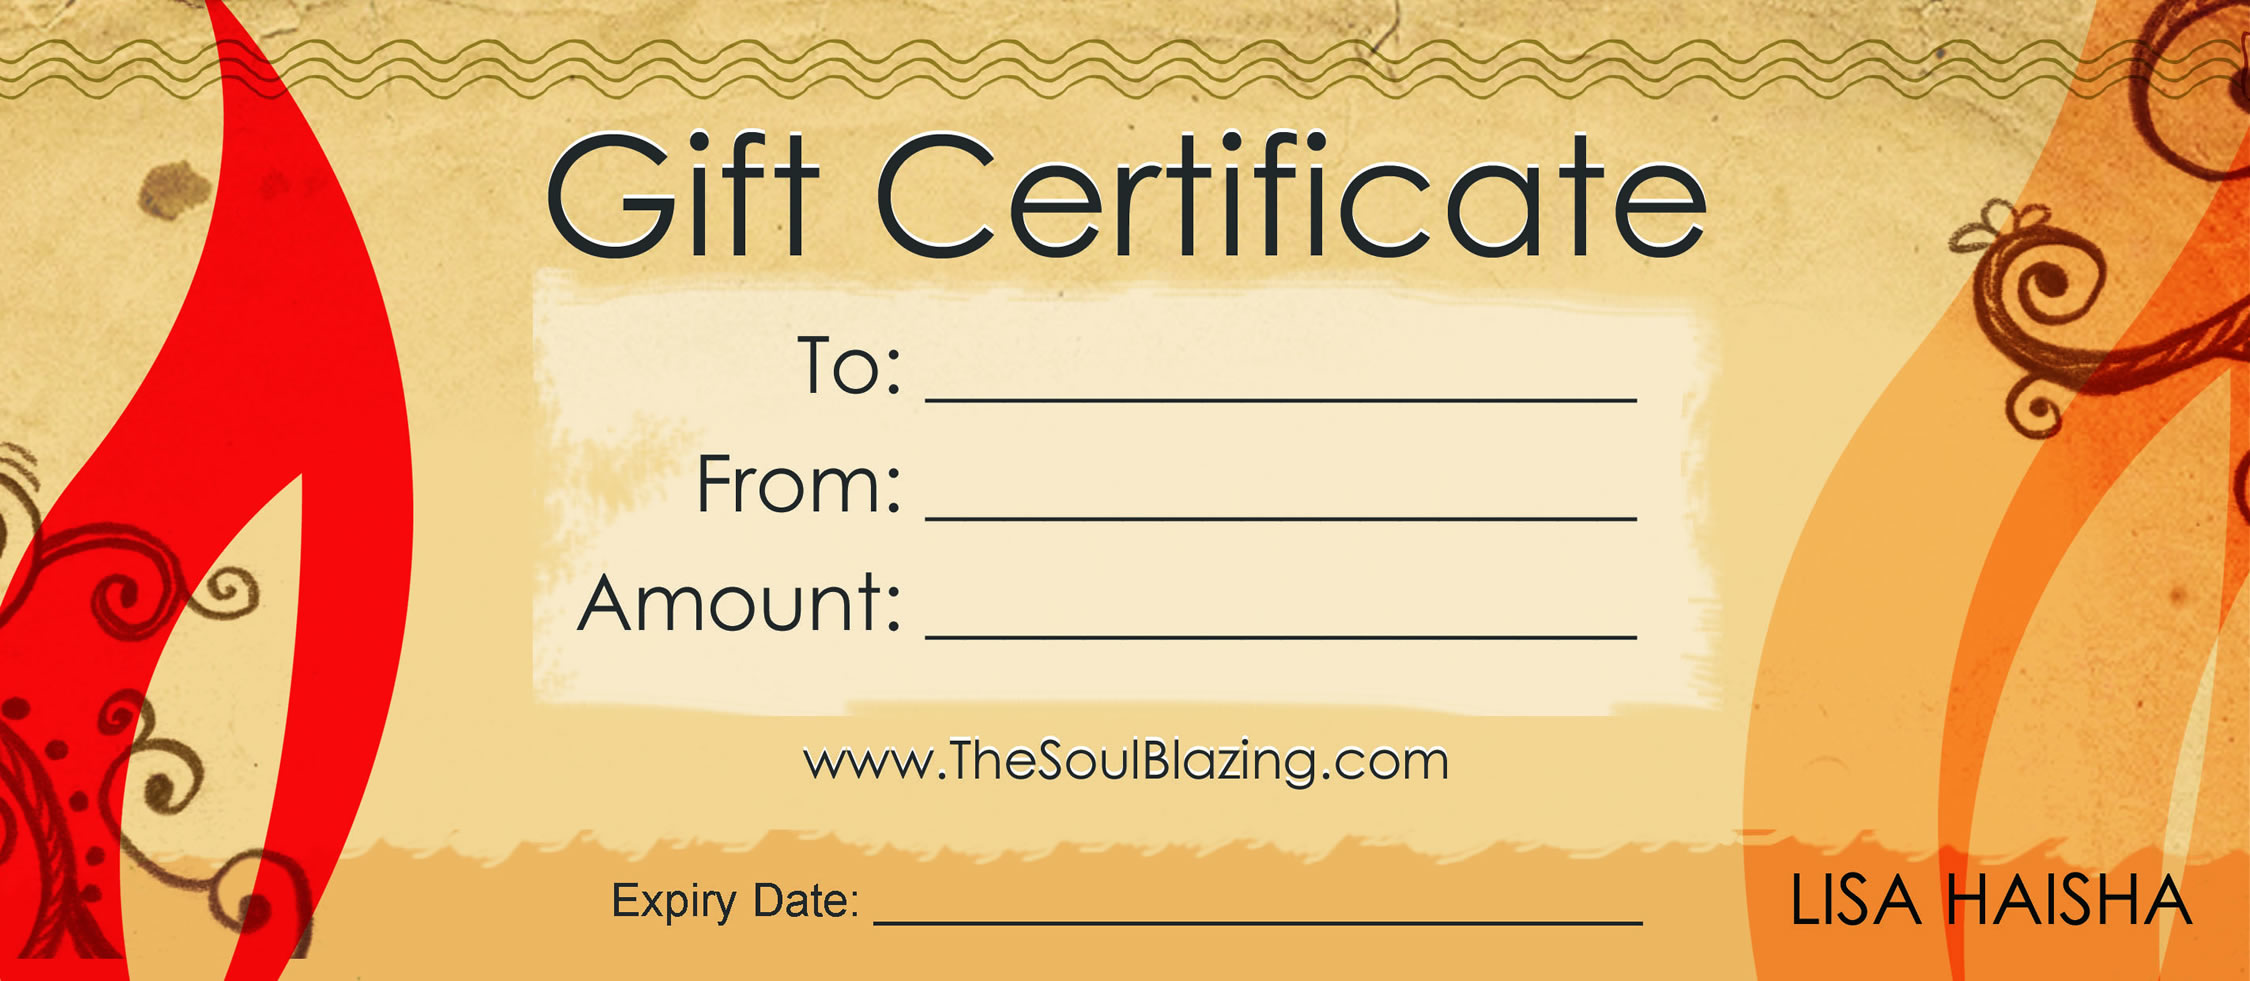 Full Colour Gift Certificates Printing With Foil Stamping Embossed 